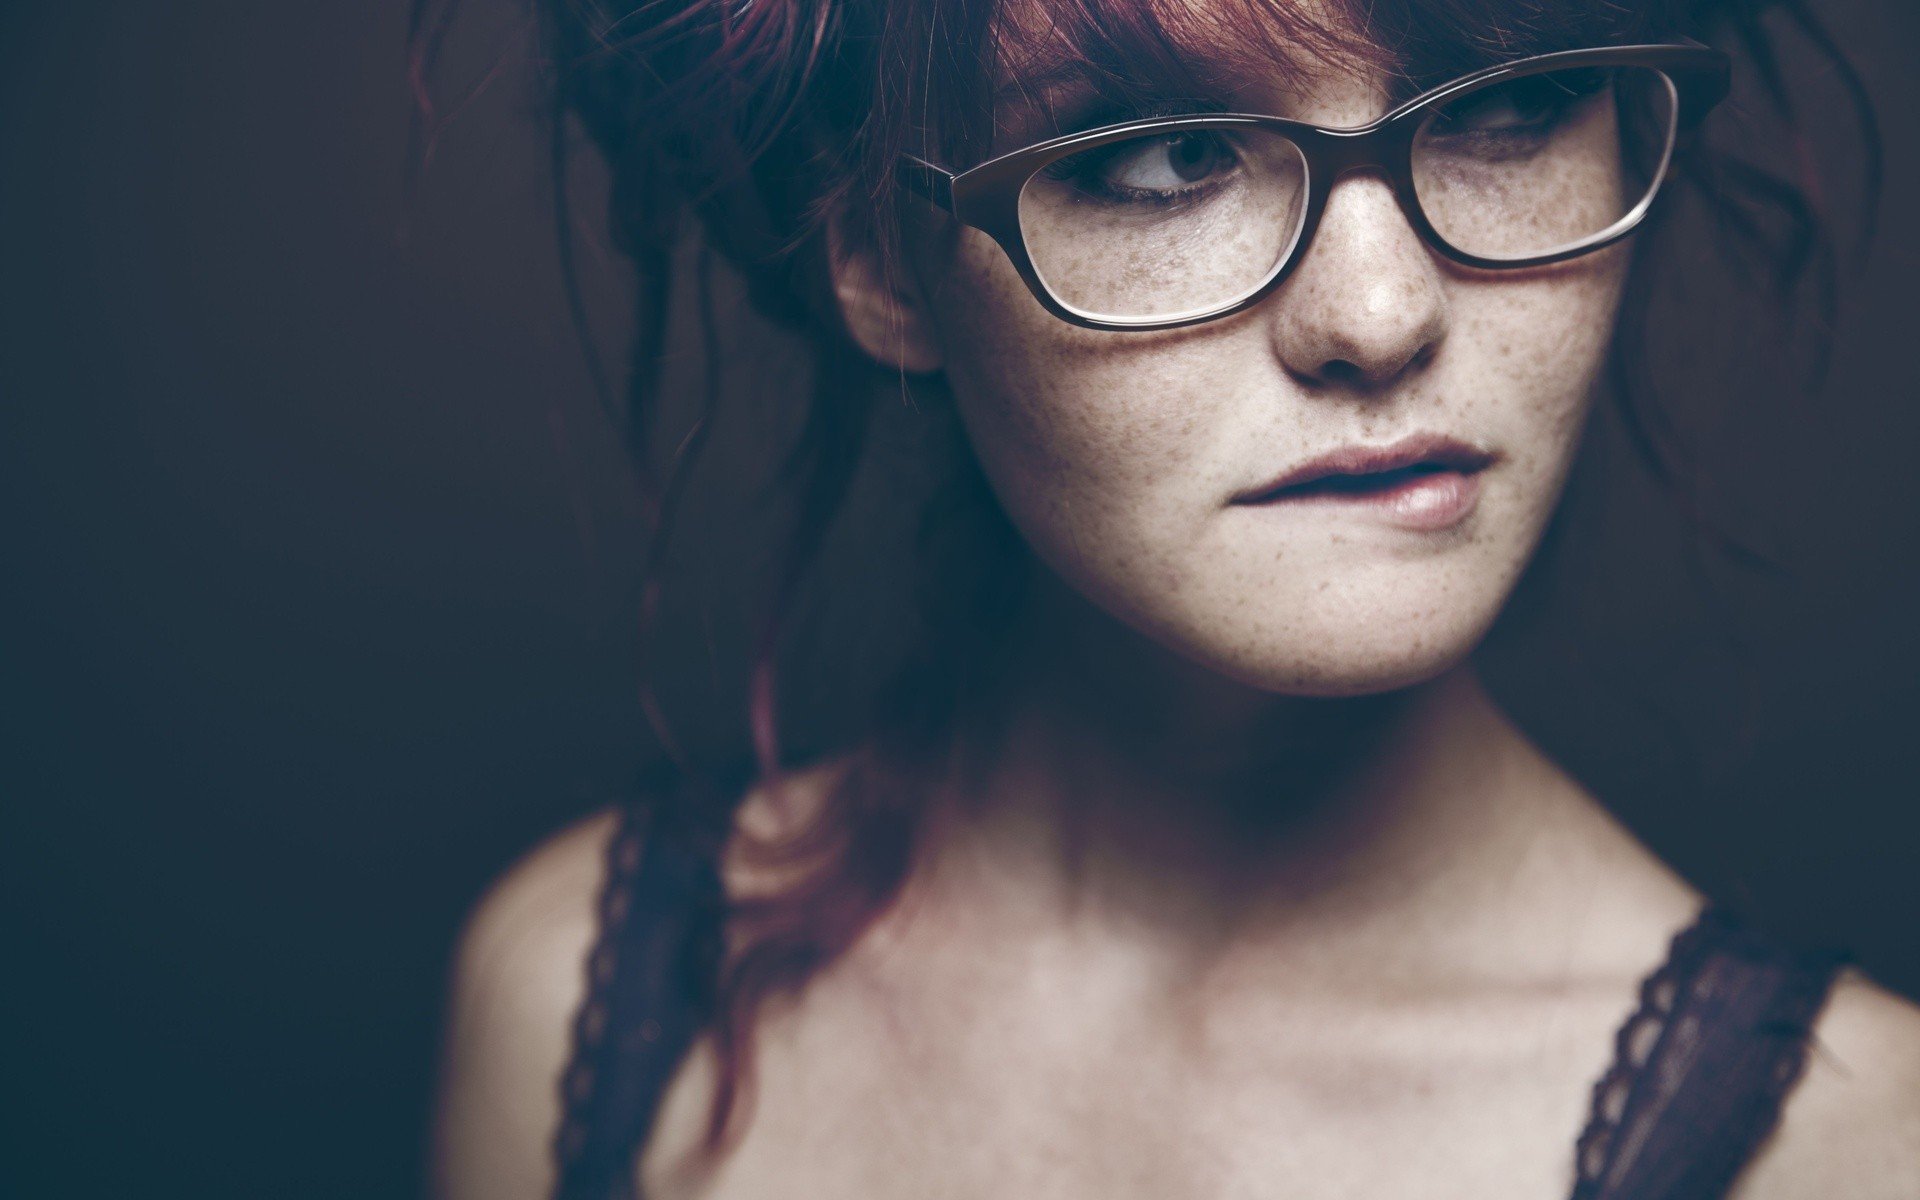 women, Face, Freckles, Biting lip, Redhead, Glasses, Women with glasses